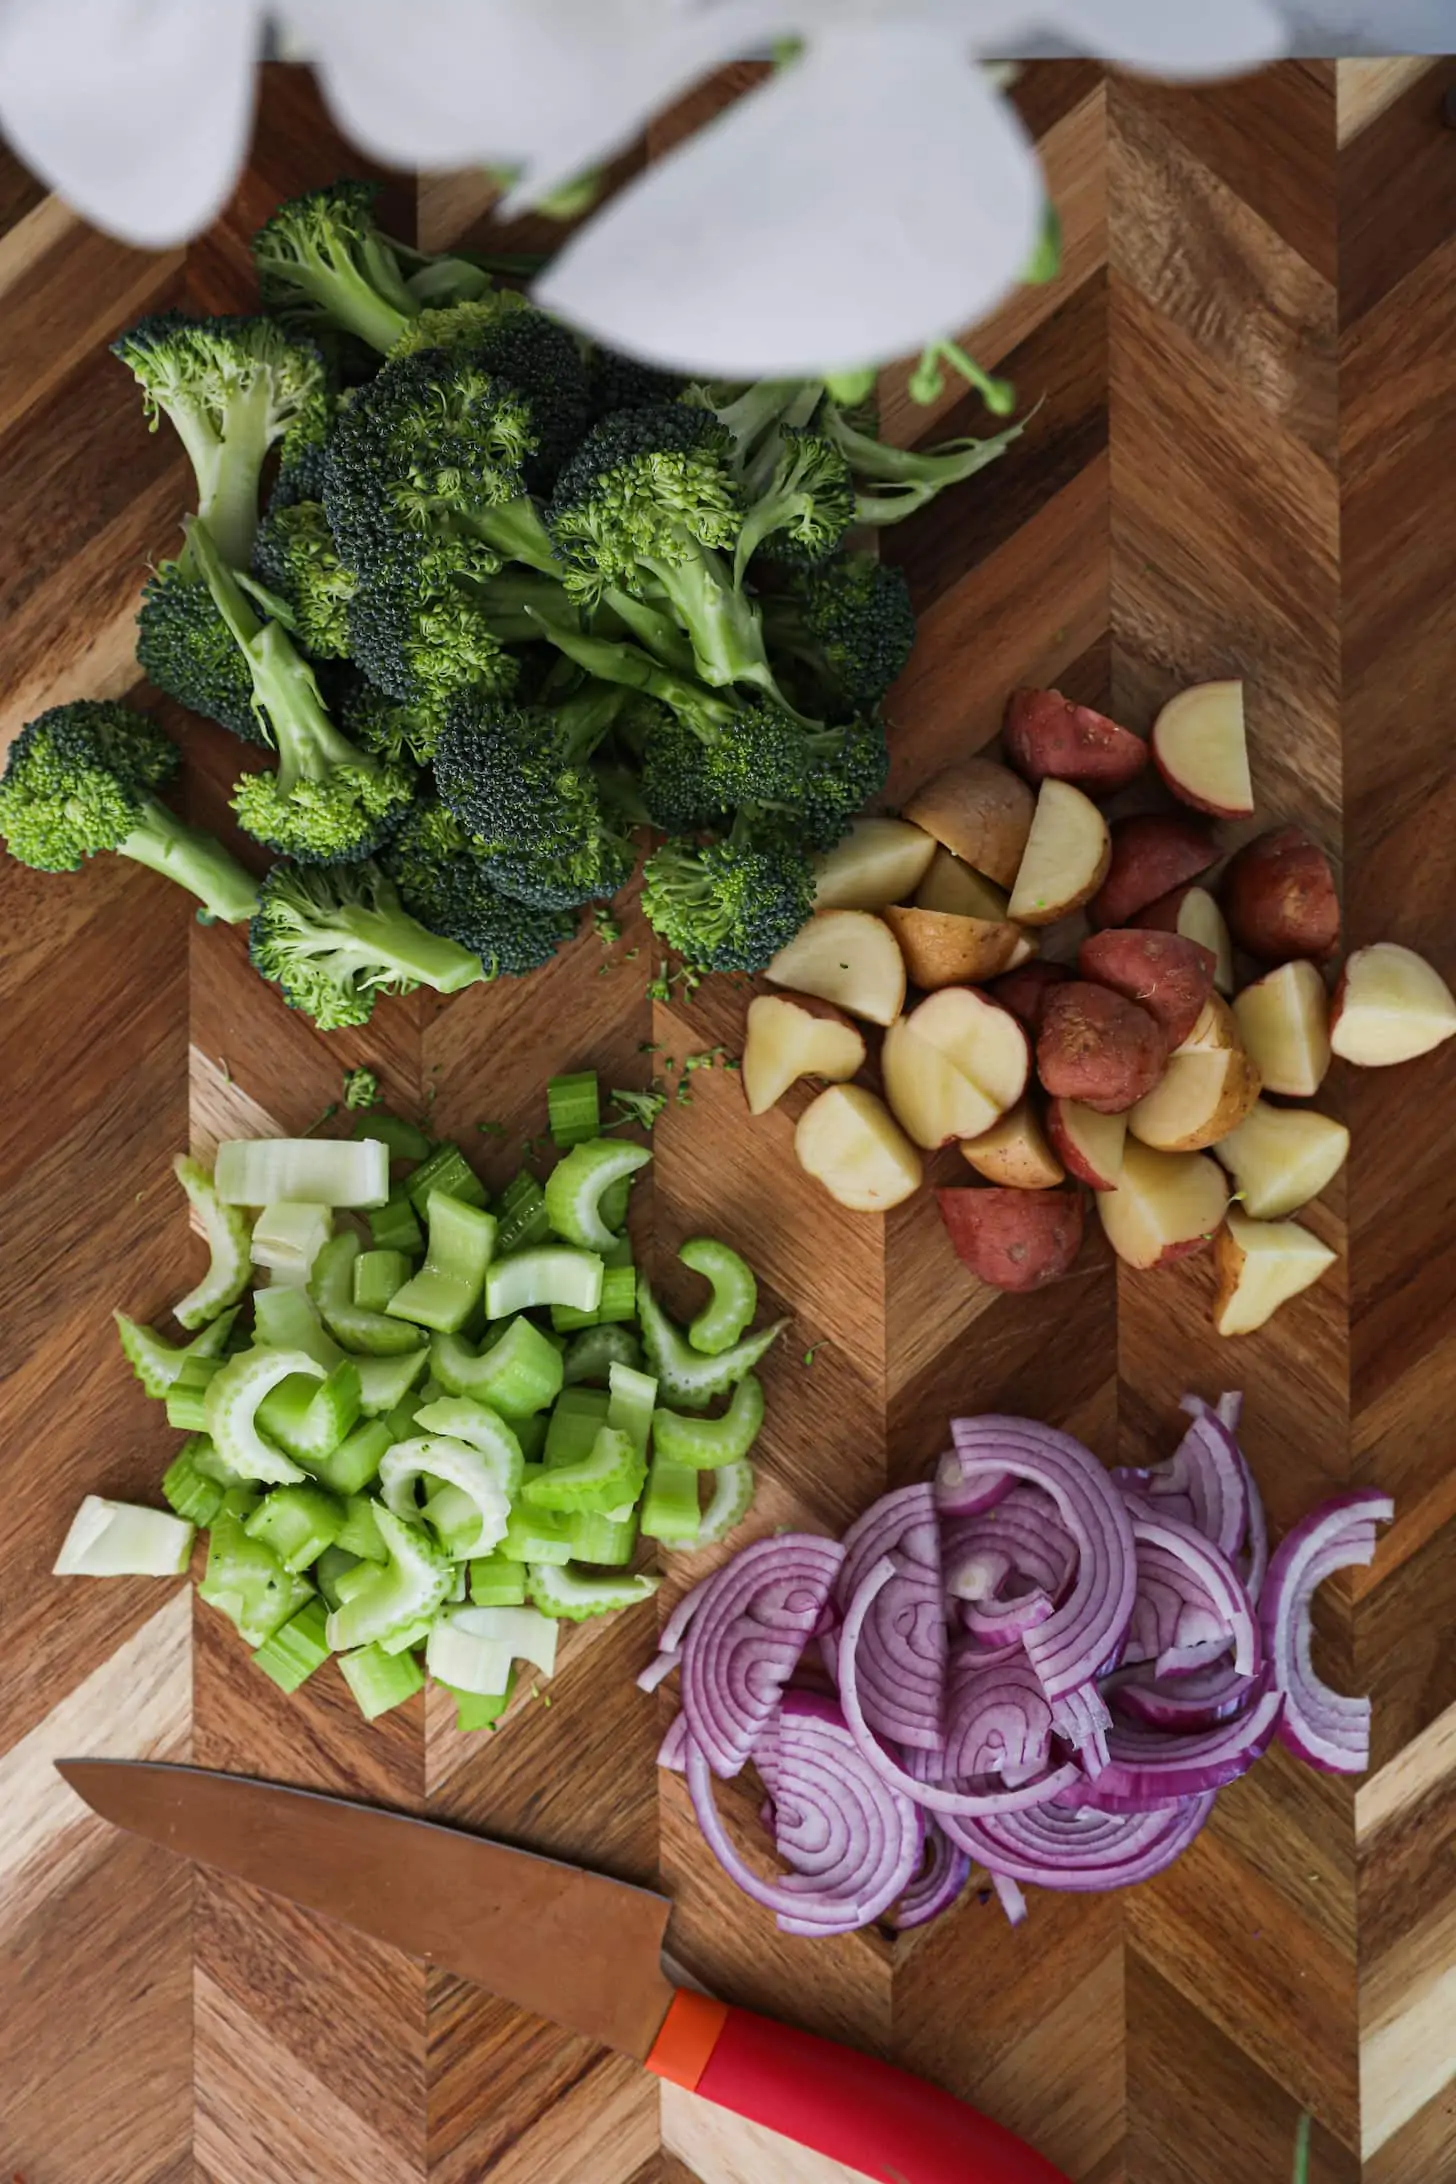 Chopped vegetables arranged on a wooden board.